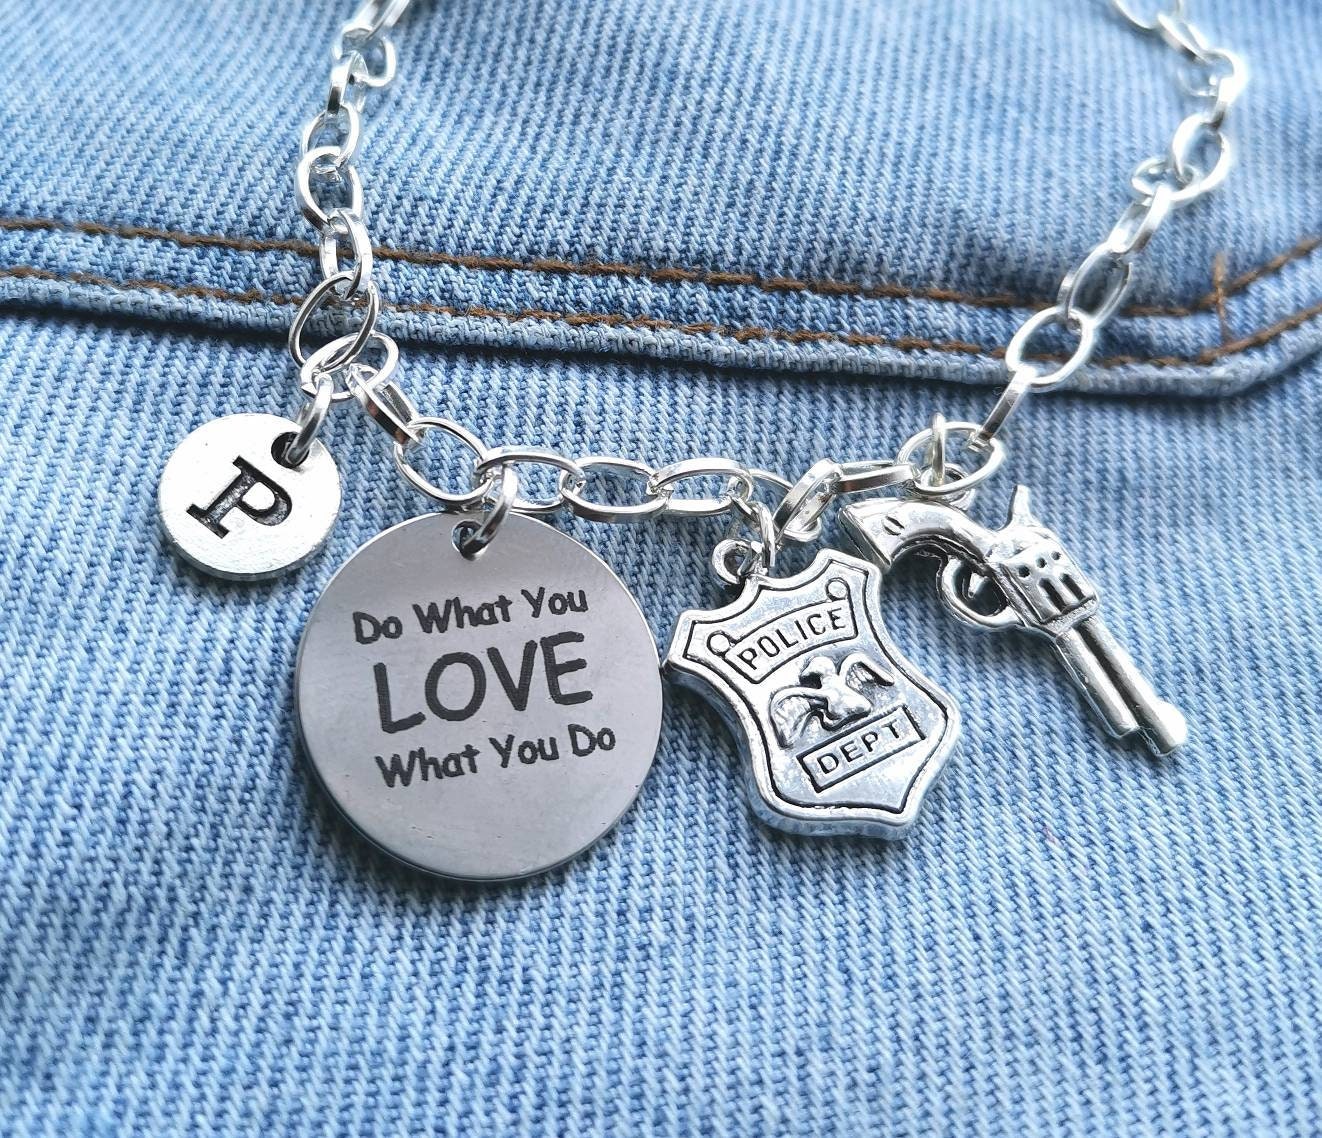 Police Gift, Police officer gift, Police gift women, Police Bracelet, Policewomen, Policeman, Cop gift, New cop, New Police, Exam, Student